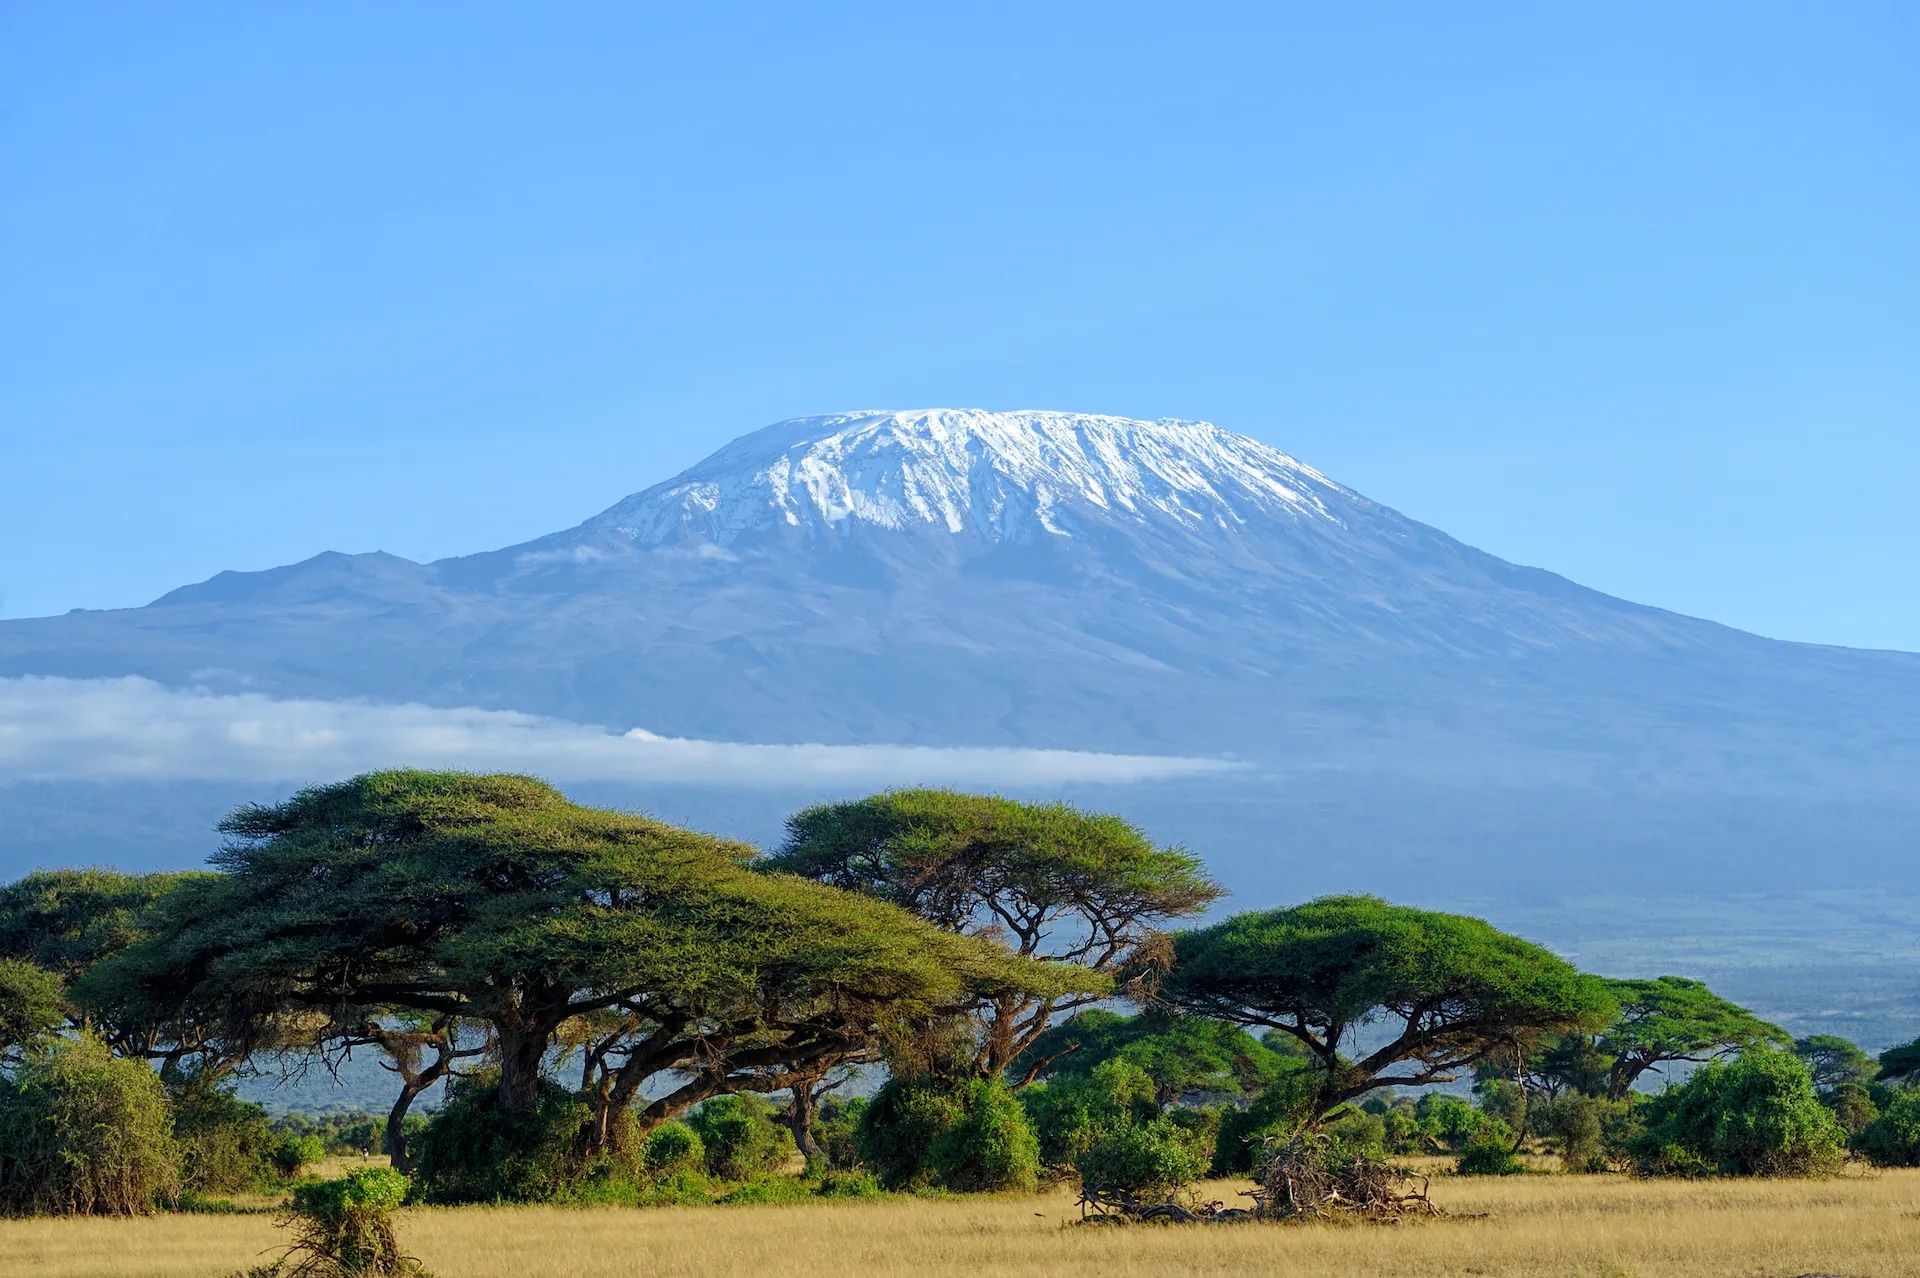 Mount Kilimanjaro, with acacia trees in the foreground.